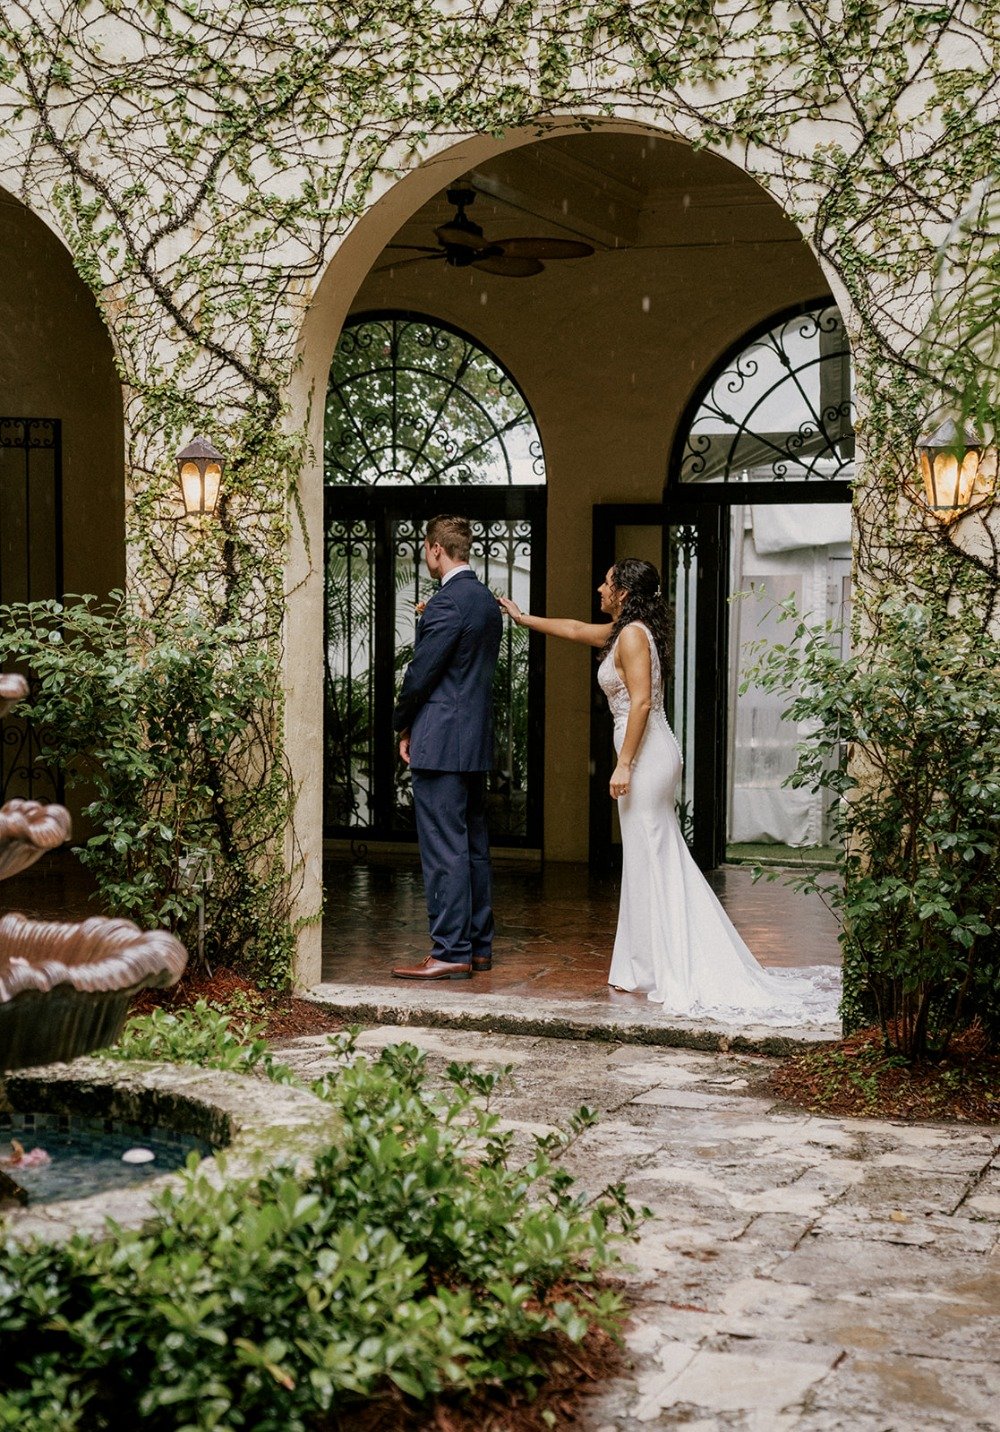 An Earthy, Organic Color Palette Made this Miami Wedding Magical